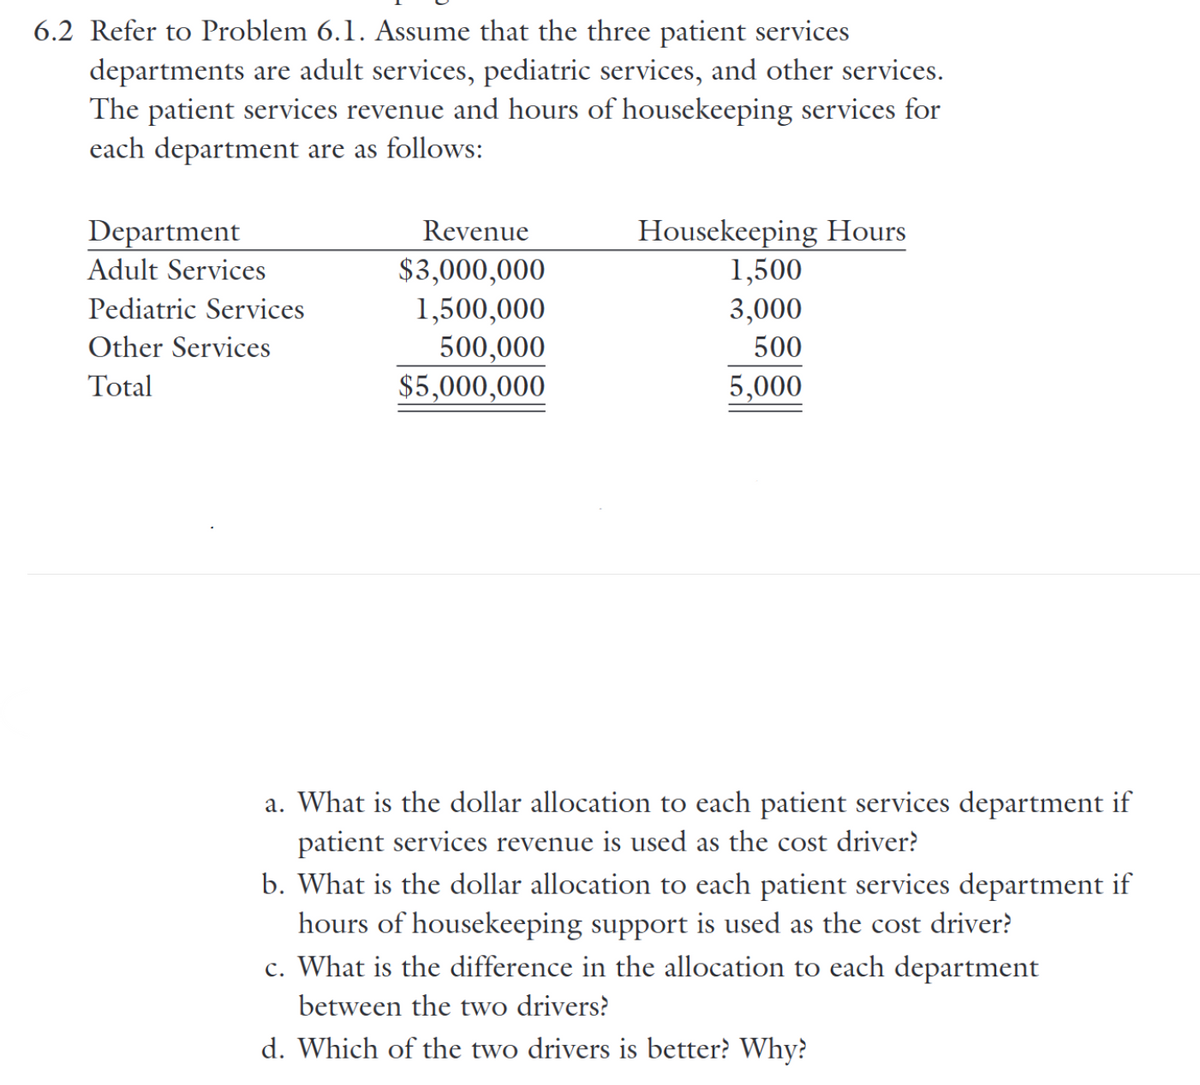 6.2 Refer to Problem 6.1. Assume that the three patient services
departments are adult services, pediatric services, and other services.
The patient services revenue and hours of housekeeping services for
each department are as follows:
Department
Revenue
Housekeeping Hours
Adult Services
$3,000,000
1,500
Pediatric Services
1,500,000
3,000
Other Services
500,000
Total
$5,000,000
500
5,000
a. What is the dollar allocation to each patient services department if
patient services revenue is used as the cost driver?
b. What is the dollar allocation to each patient services department if
hours of housekeeping support is used as the cost driver?
c. What is the difference in the allocation to each department.
between the two drivers?
d. Which of the two drivers is better? Why?